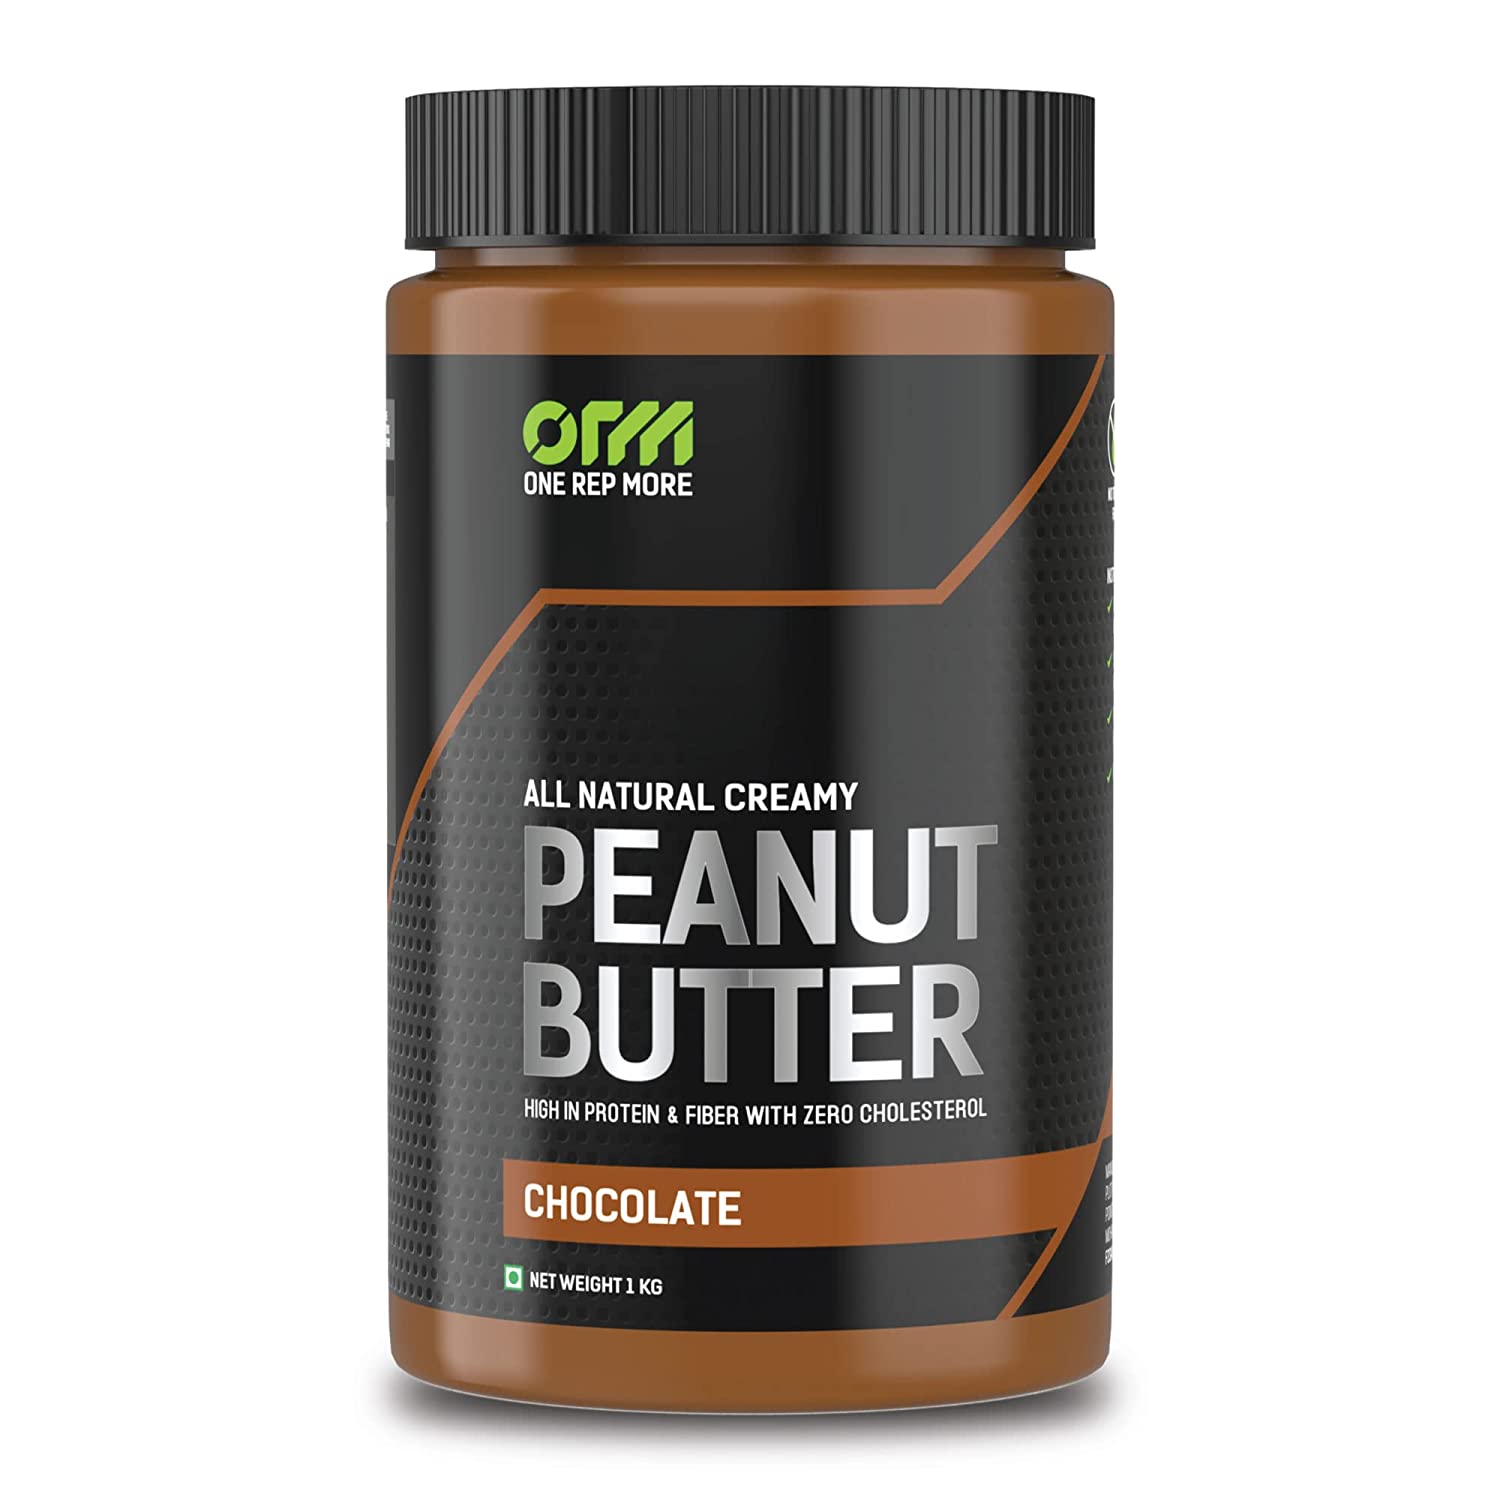 ONE REP MOR Chocolate Peanut butter Image